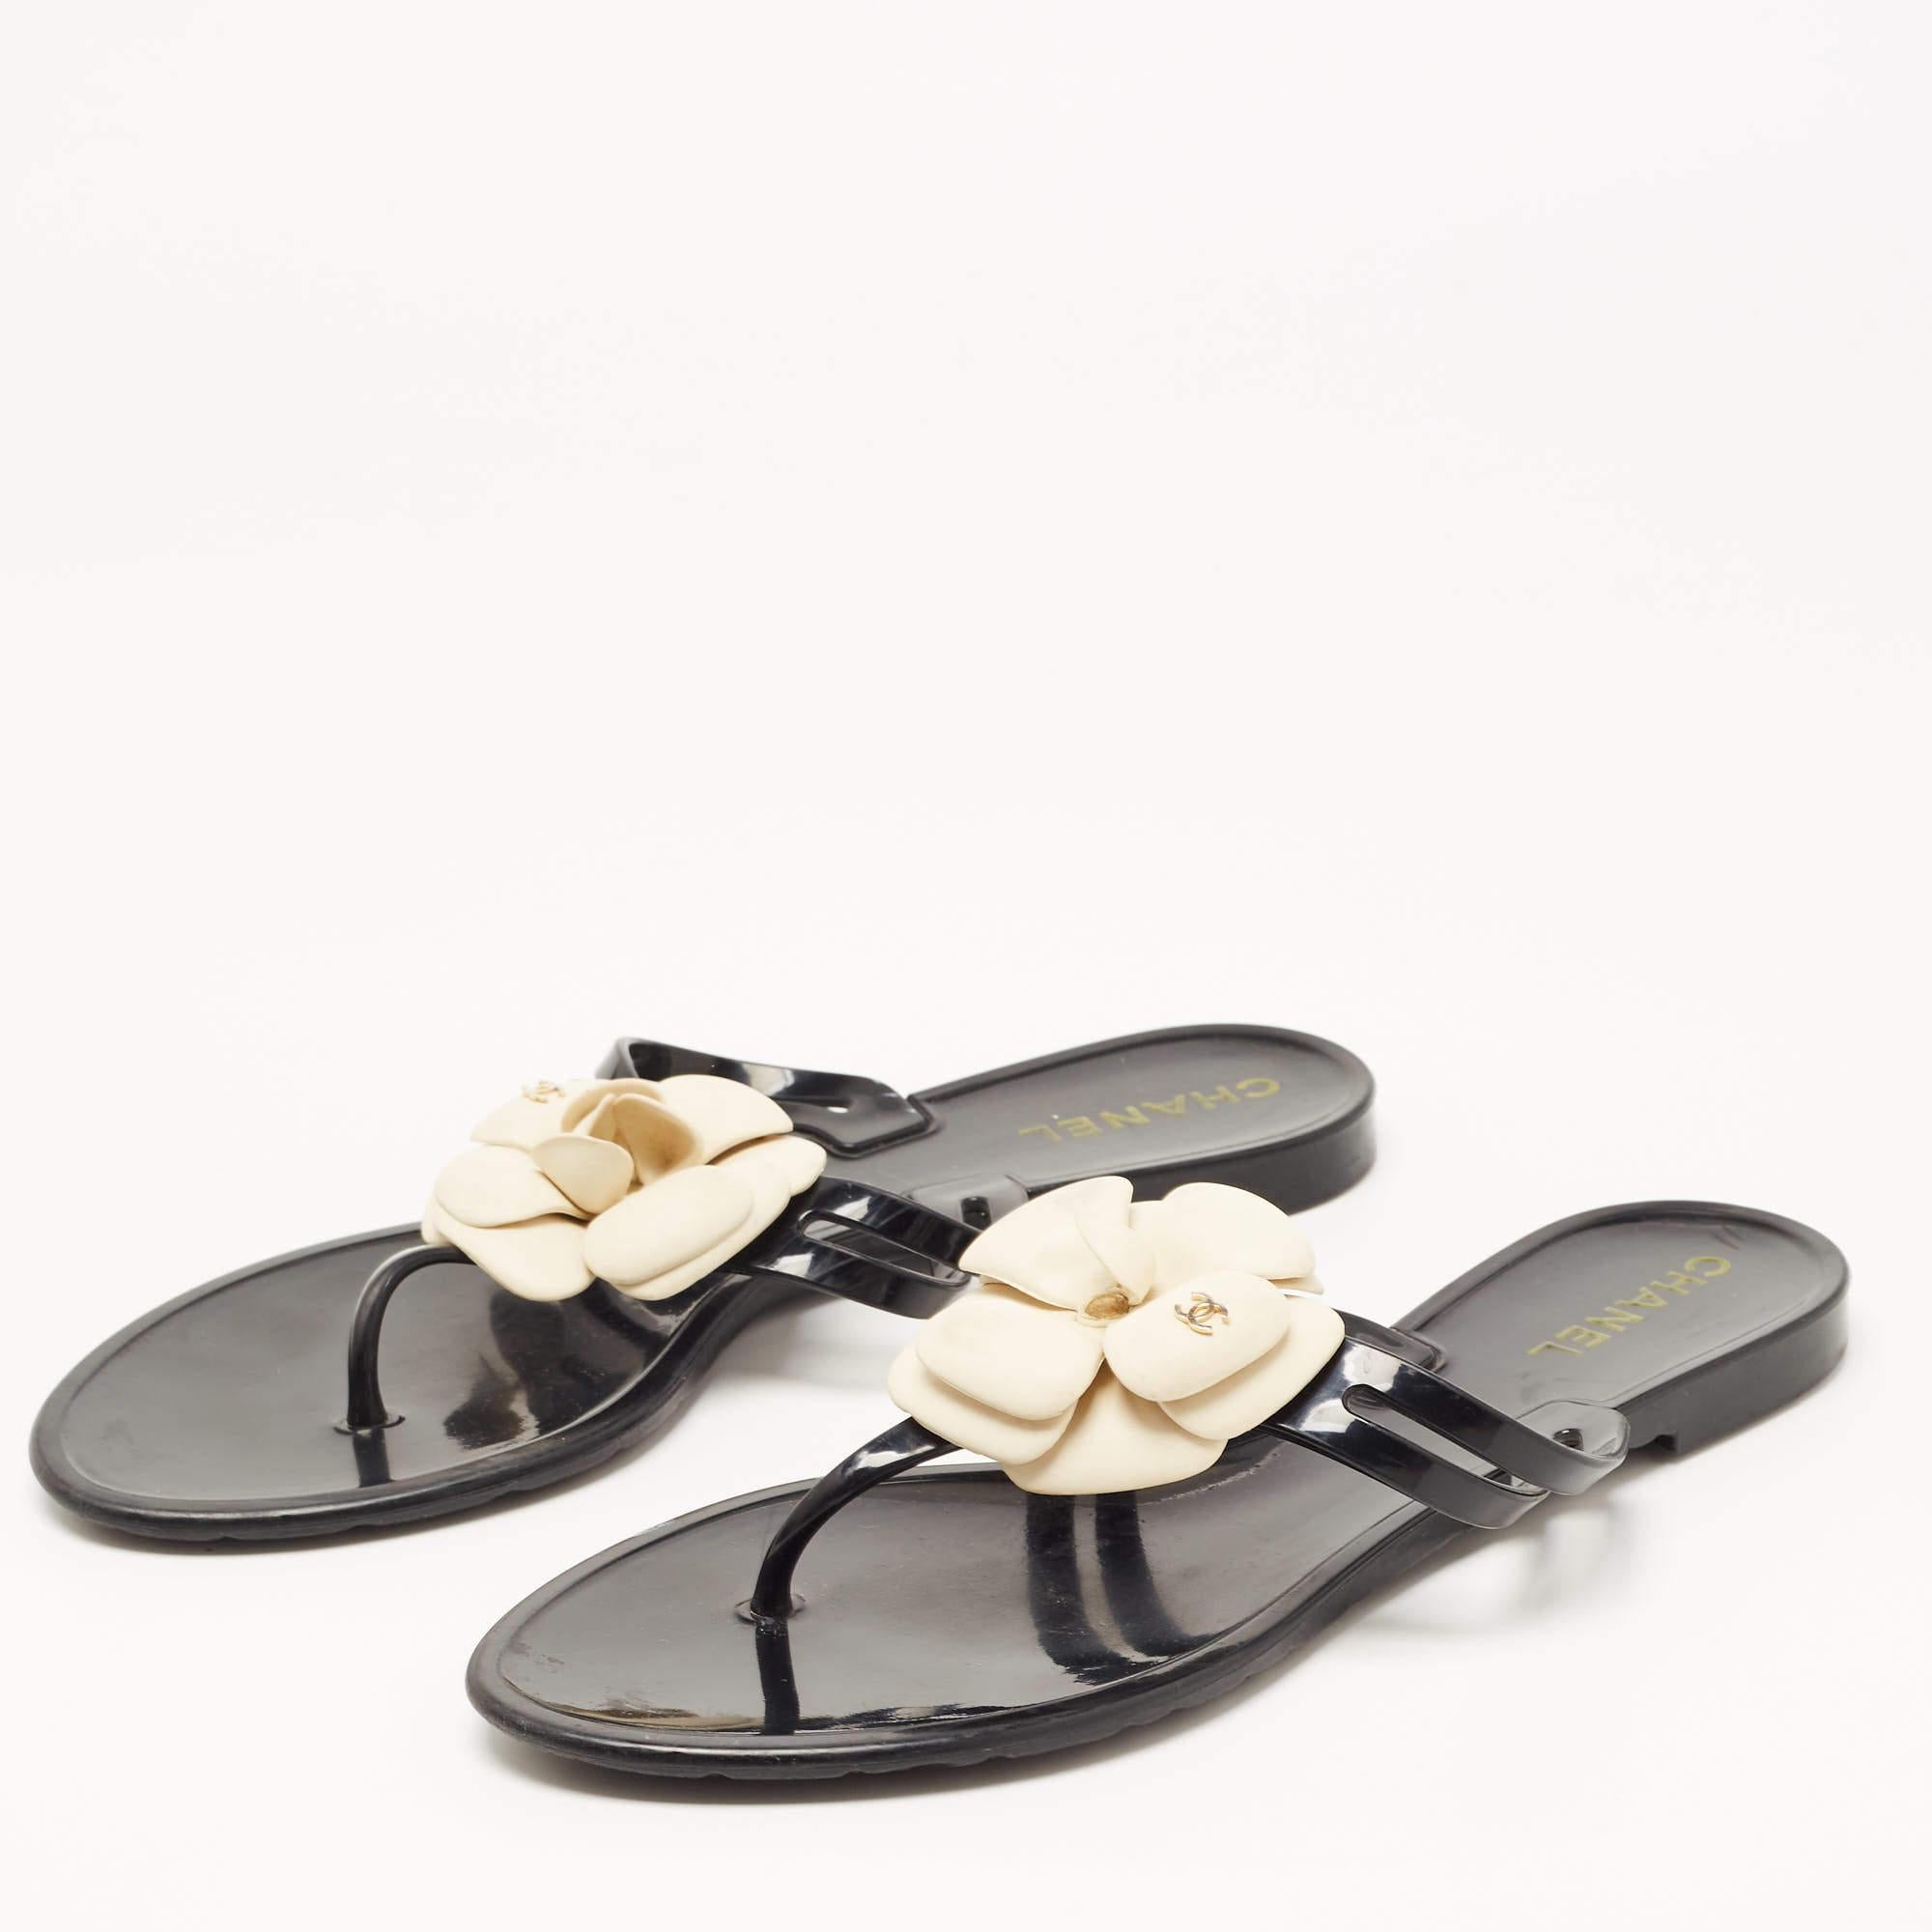 A perfect blend of luxury, style, and comfort, these designer flats are made using quality materials and frame your feet in the most refined way. They can be paired with a host of outfits from your wardrobe.

